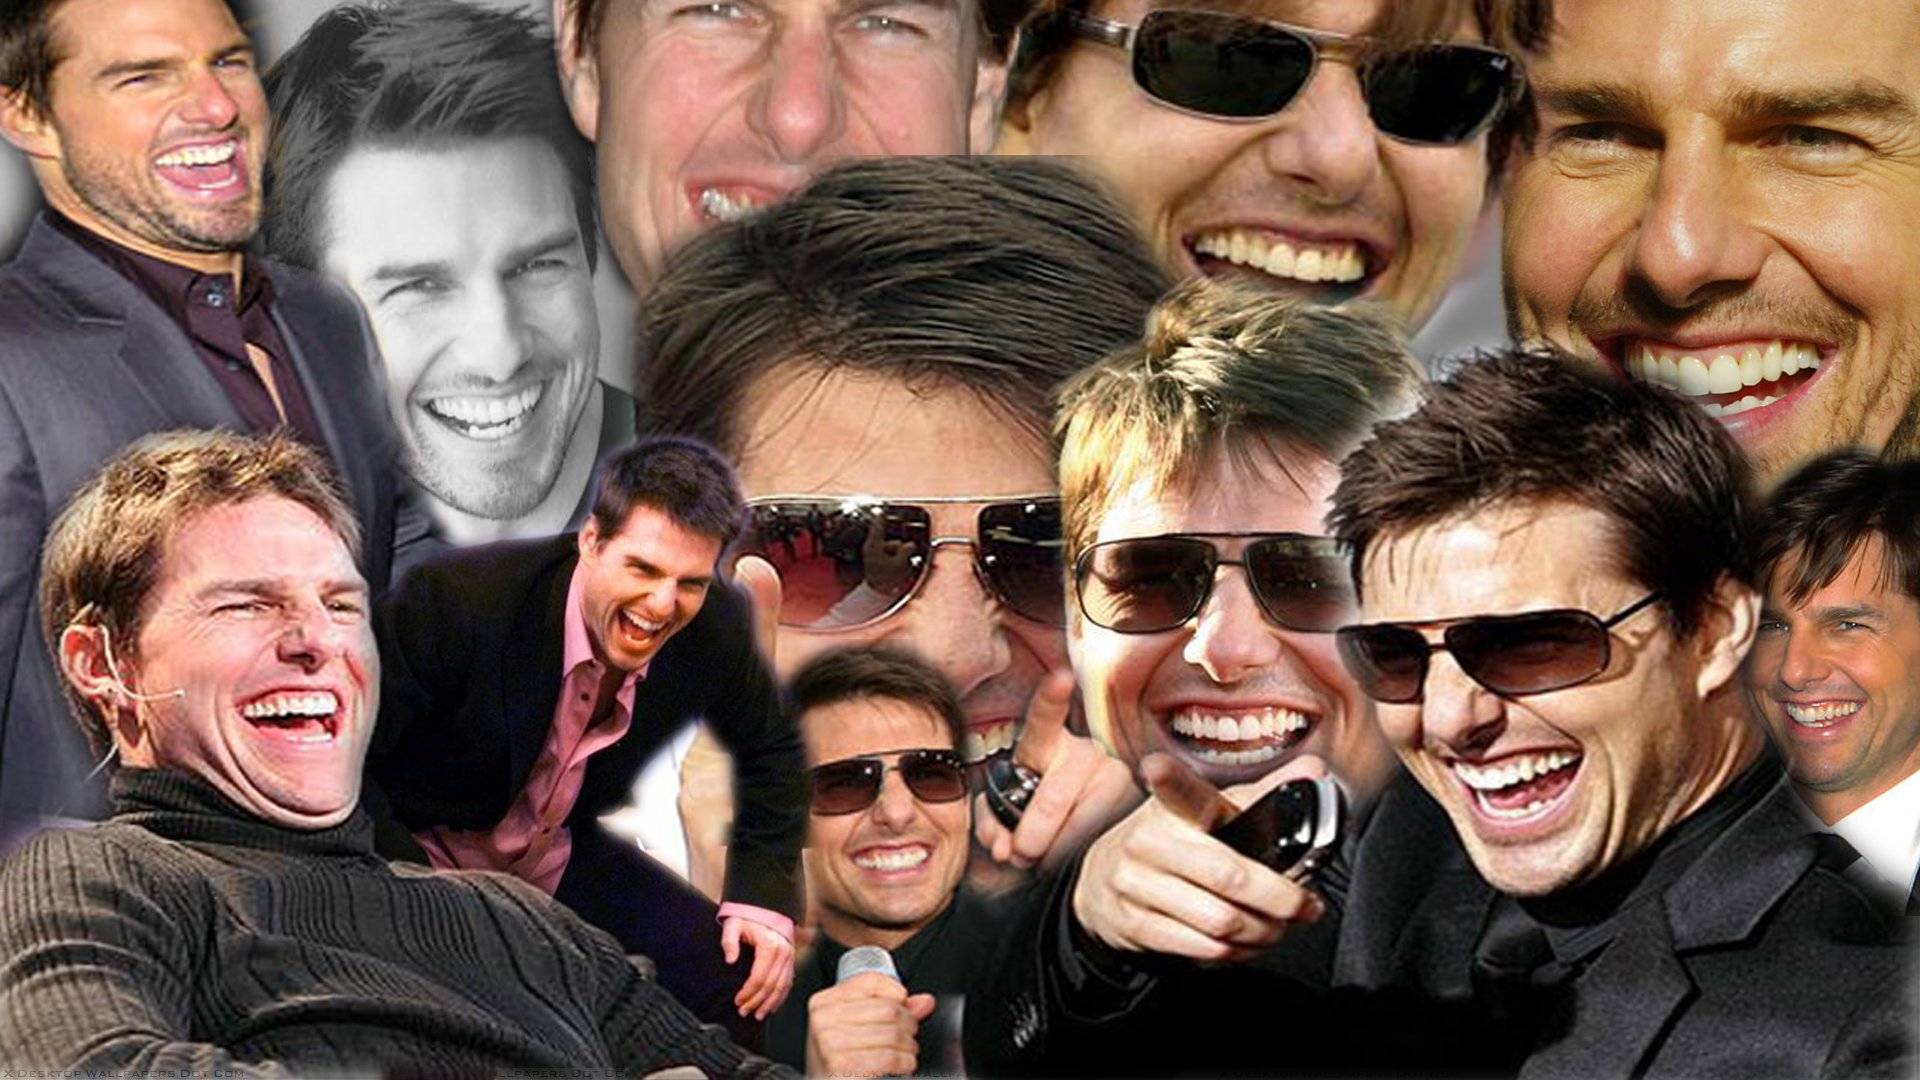 Image   877219] Laughing Tom Cruise Know Your Meme